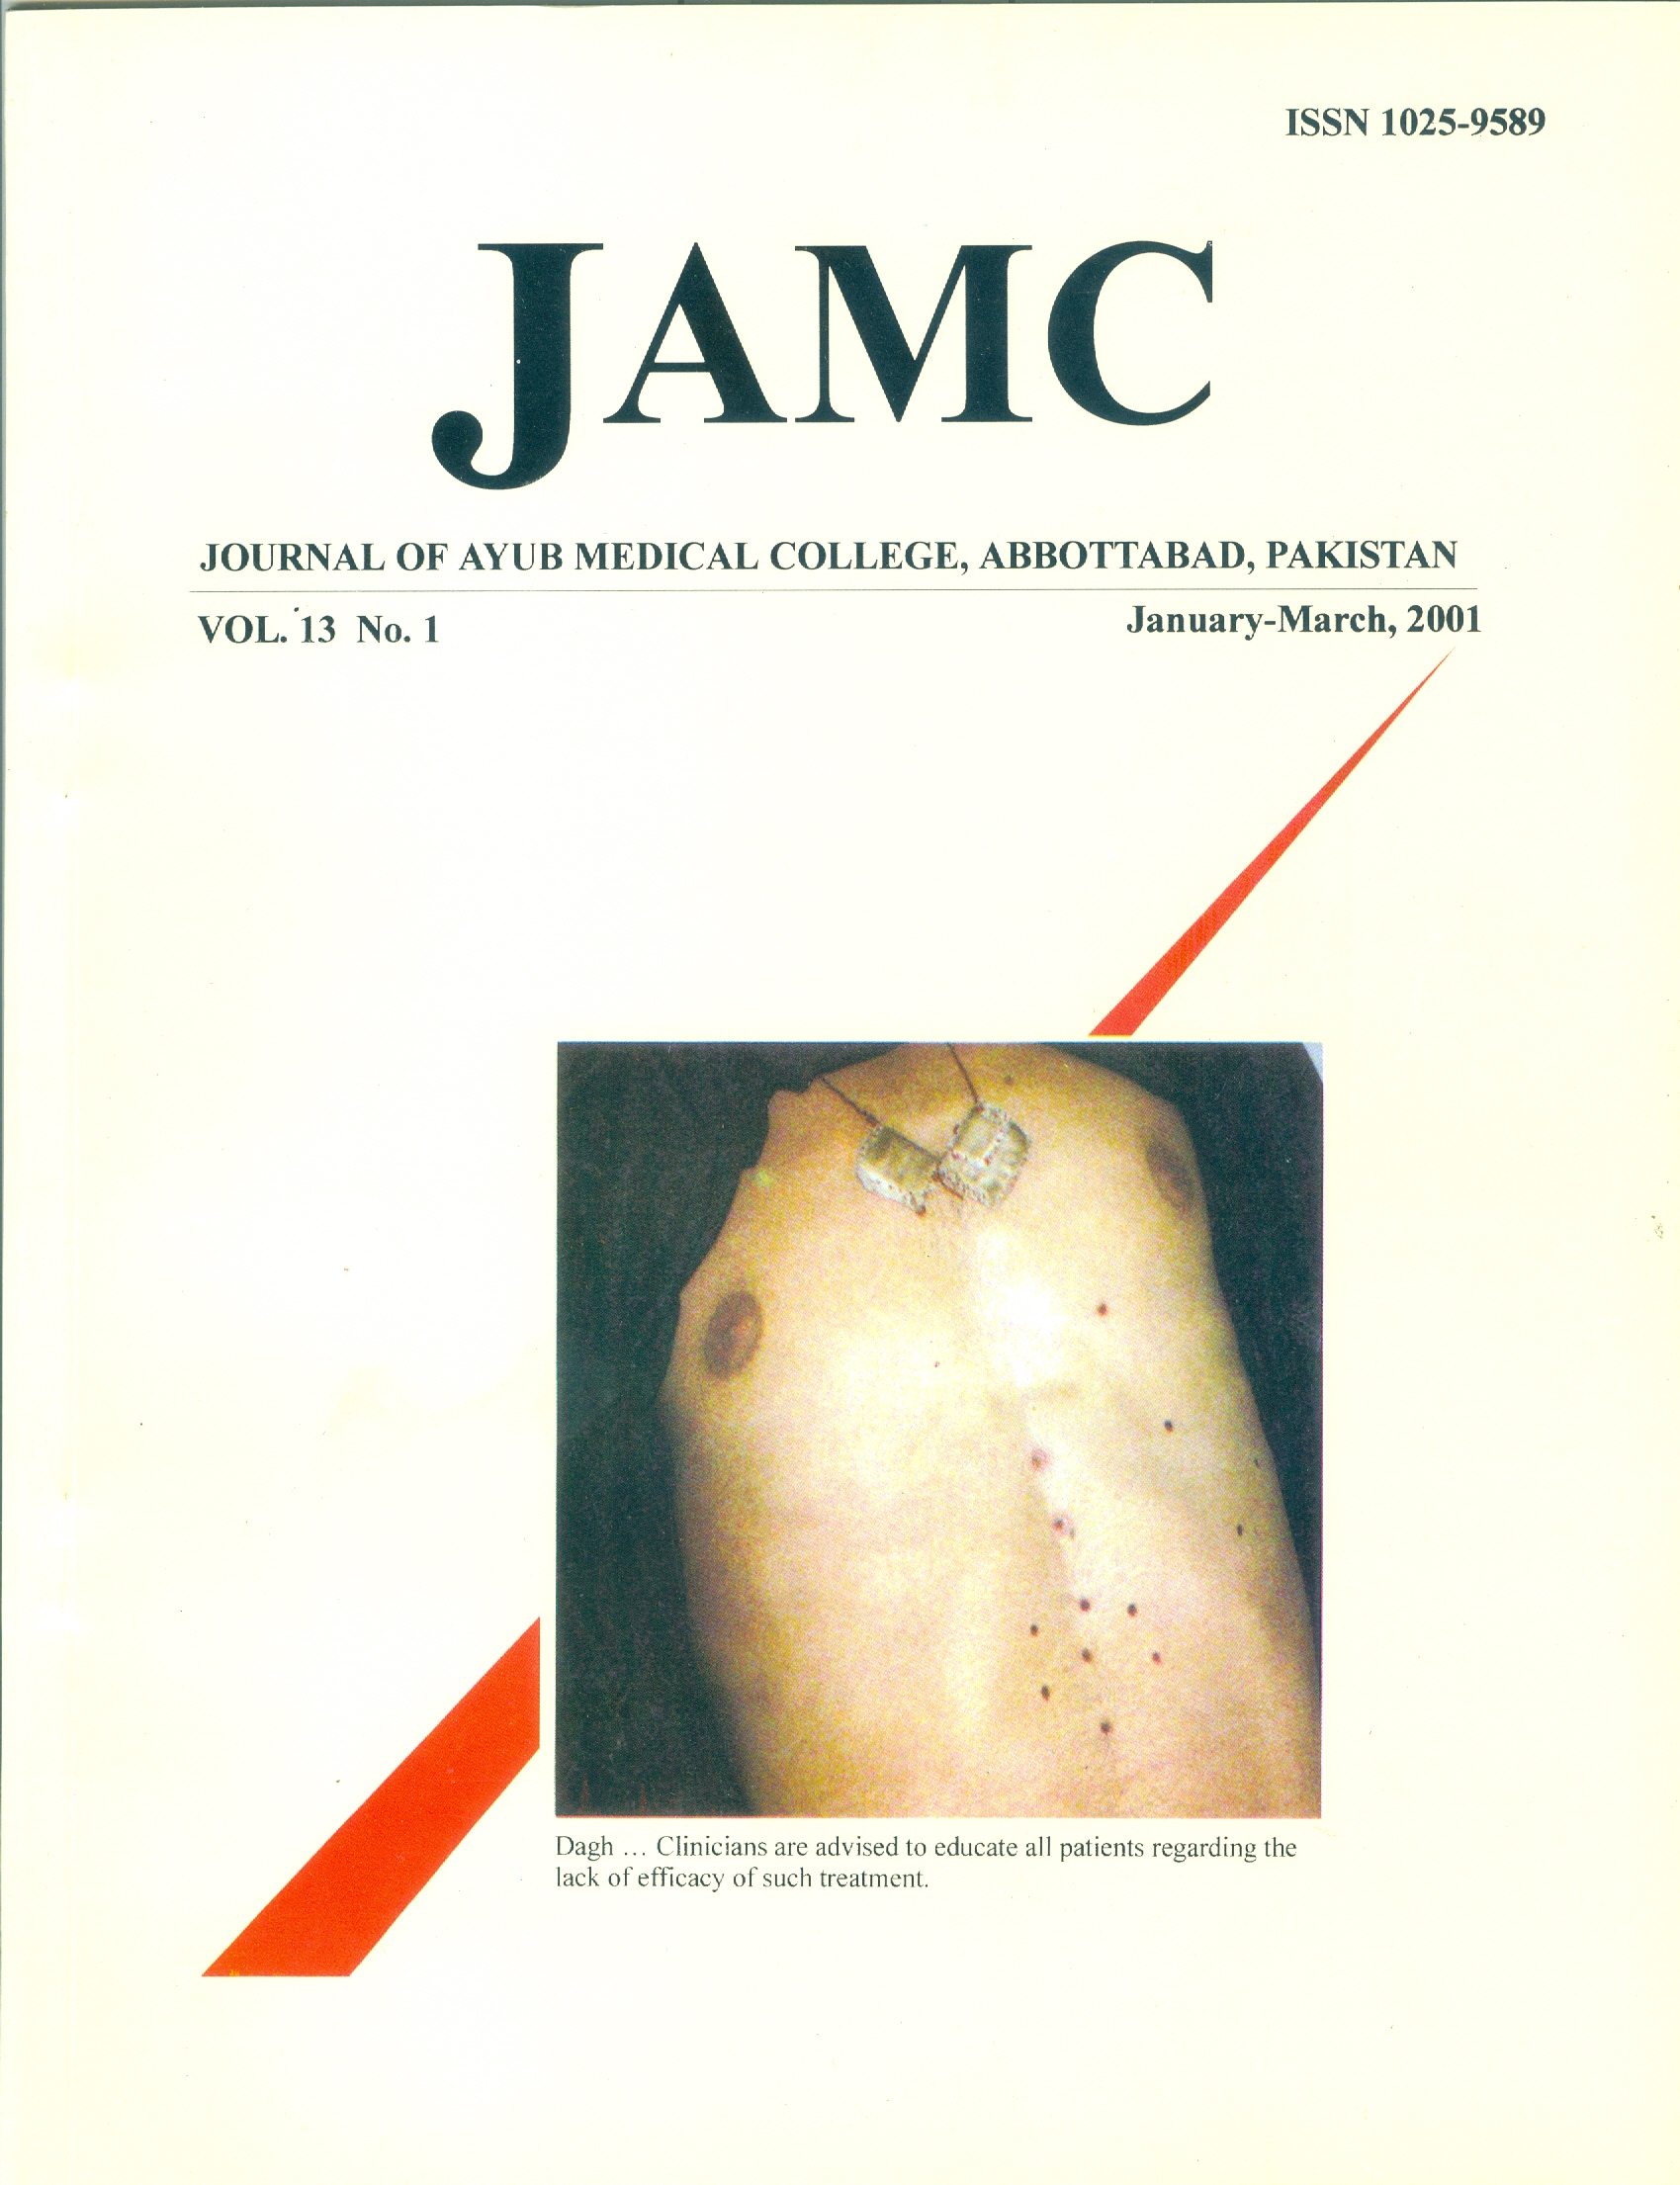 					View Vol. 13 No. 1 (2001): JOURNAL OF AYUB MEDICAL COLLEGE, ABBOTTABAD
				